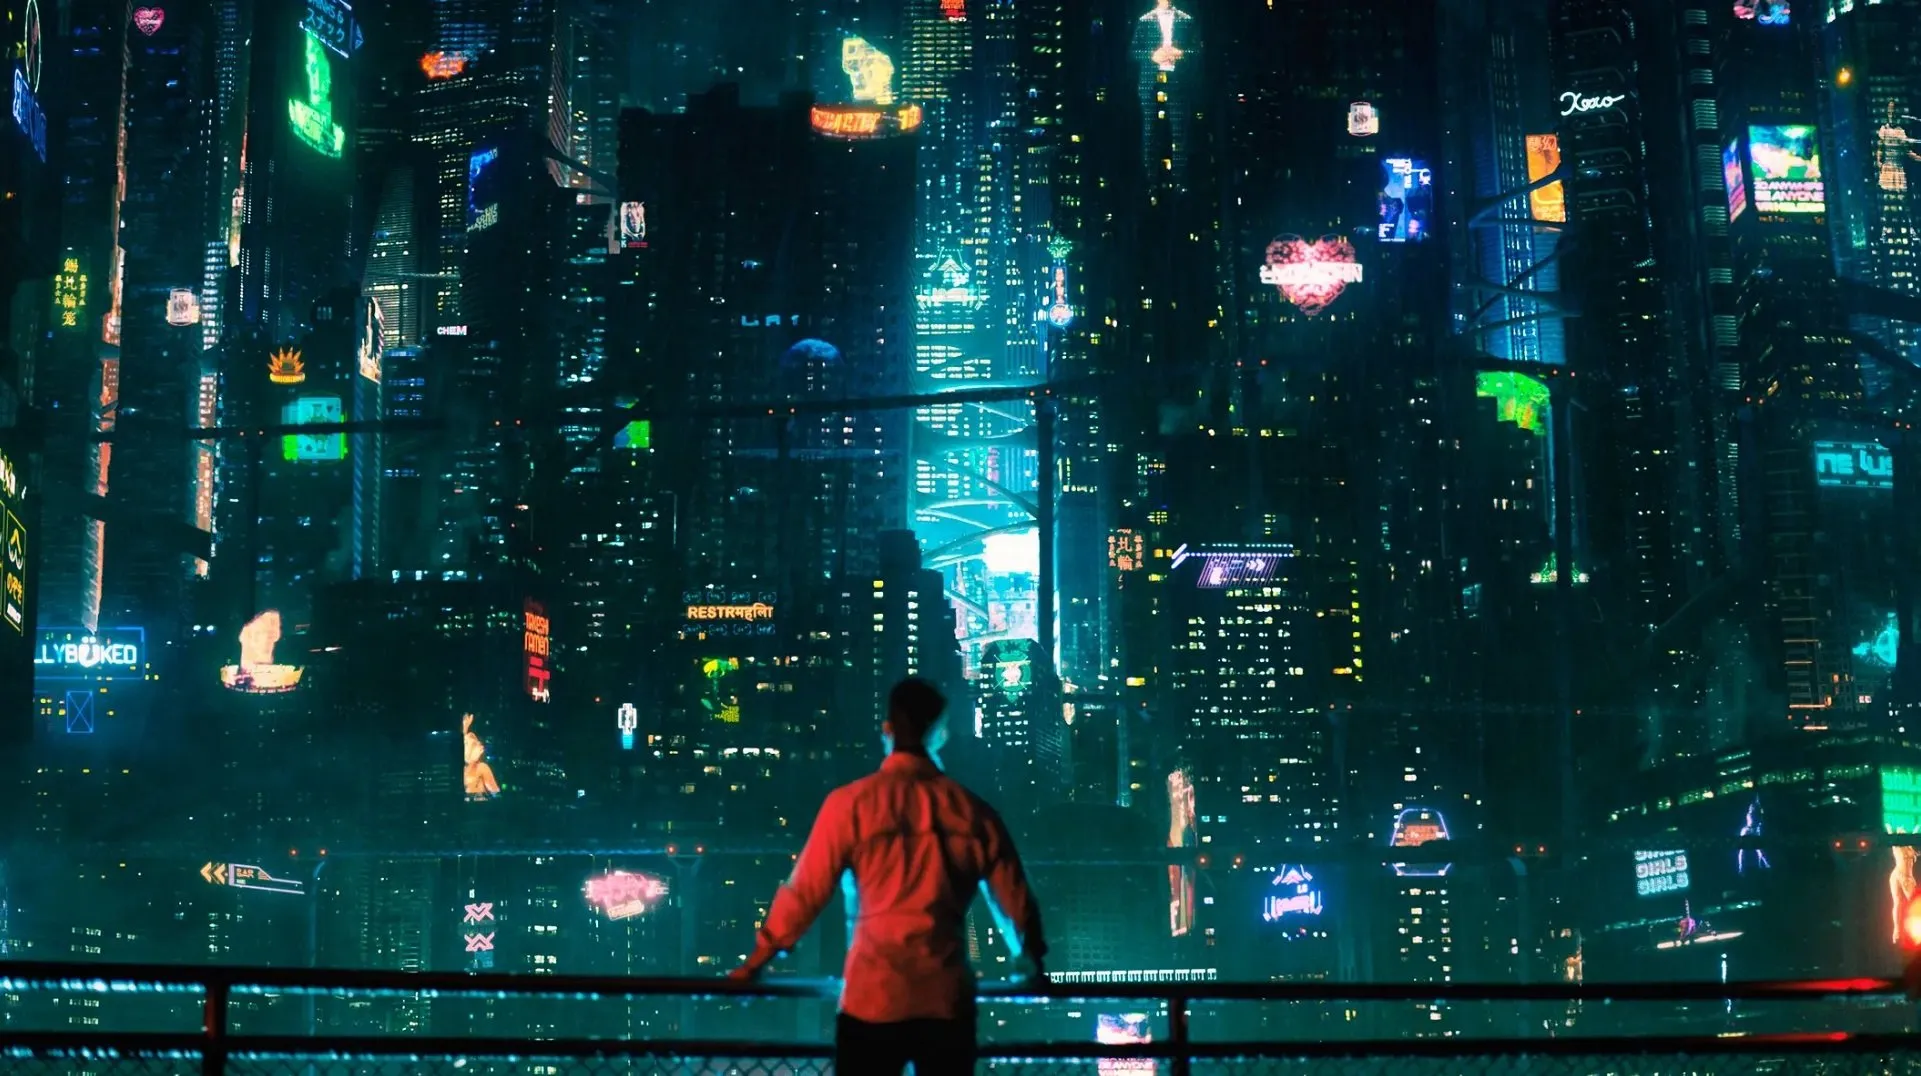 What is the best sci-fi series on Netflix? Altered Carbon